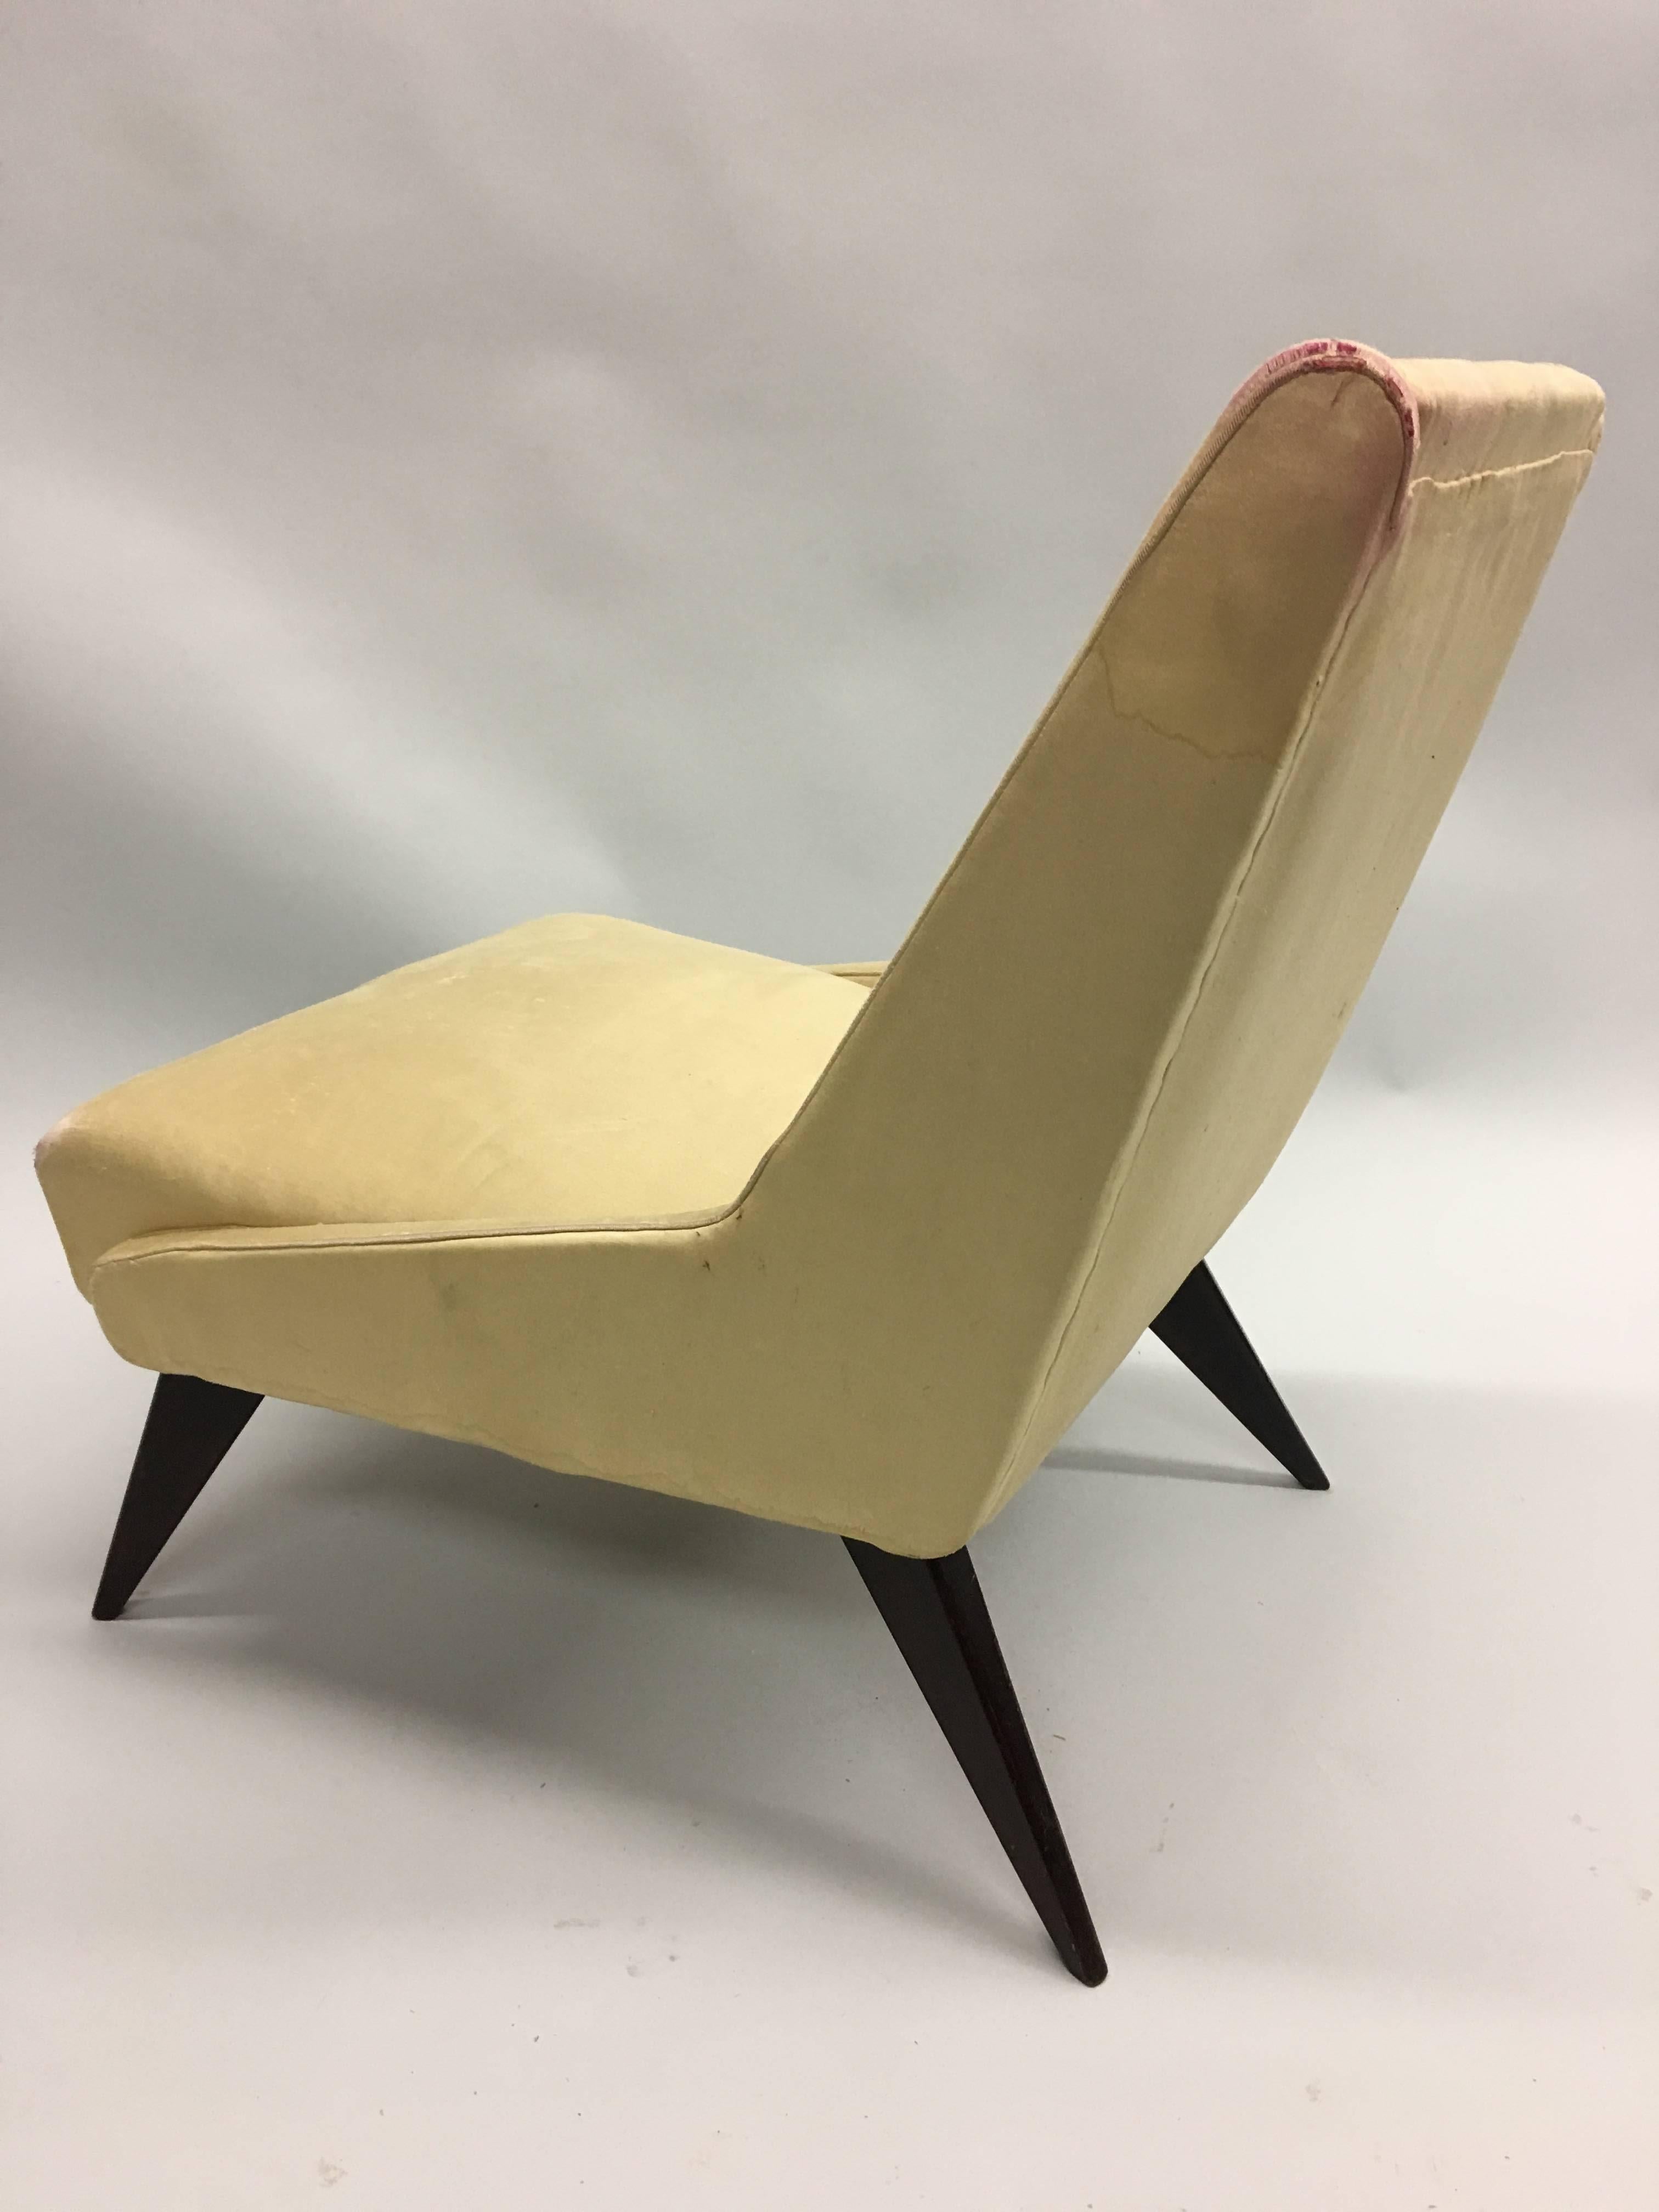 Upholstery Pair of Italian Mid-Century Modern Lounge / Slipper Chairs by ISA, 1950 For Sale